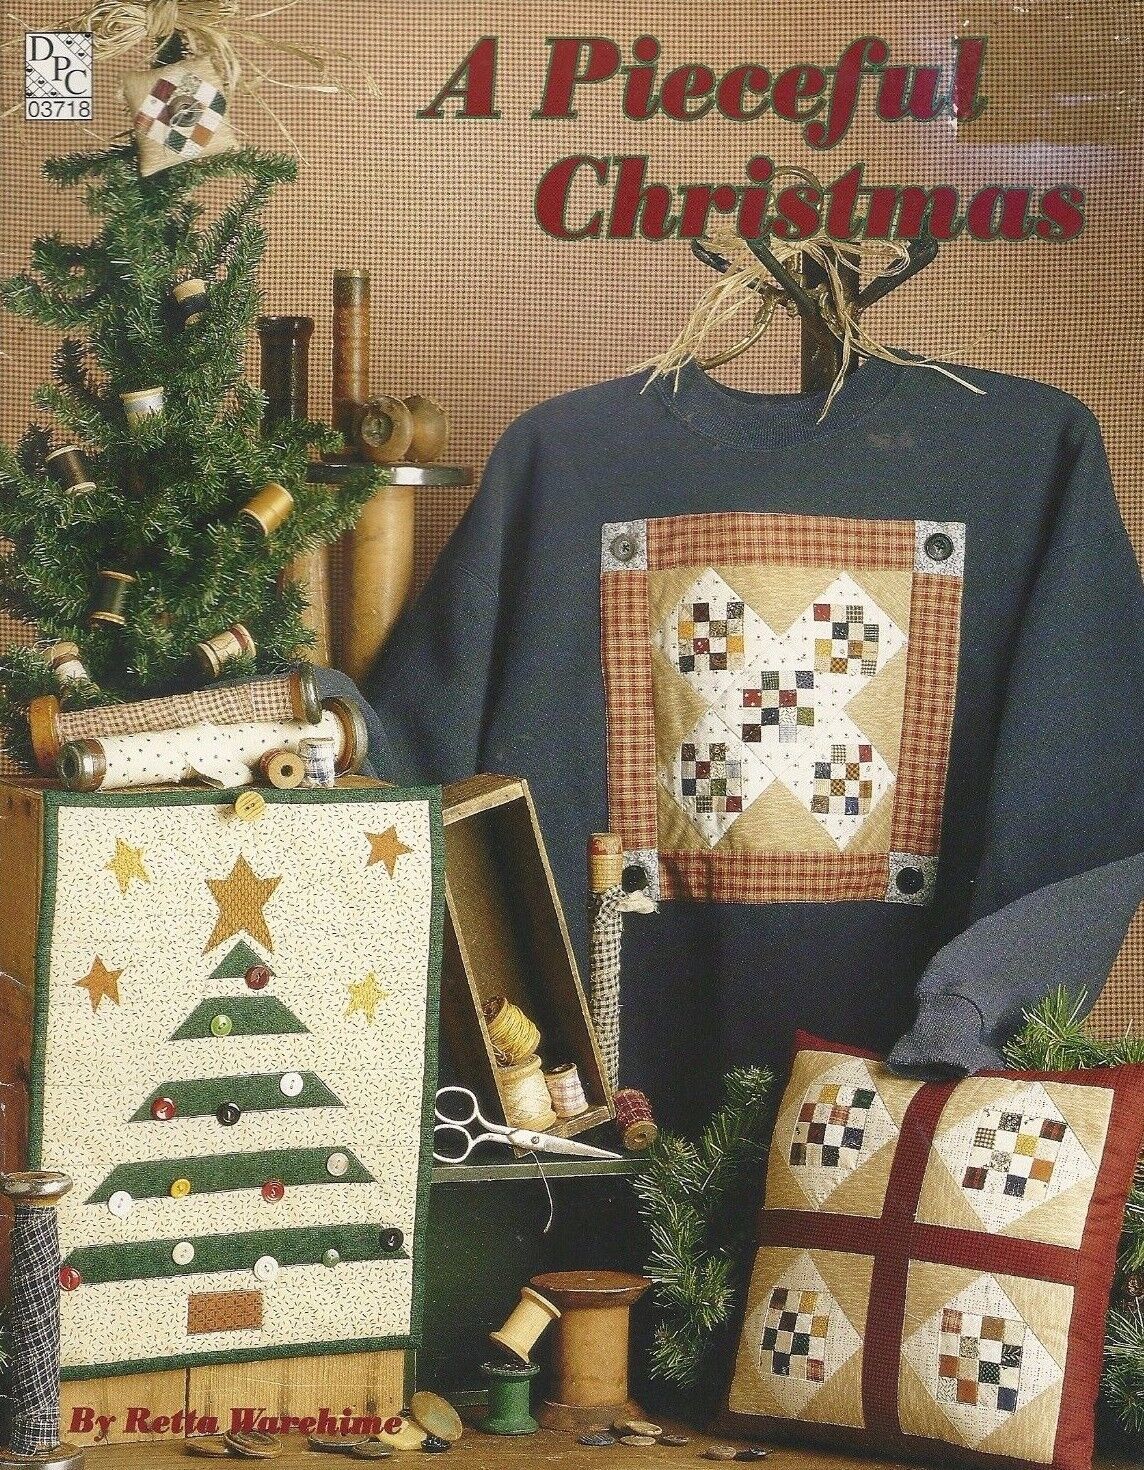 Primary image for A Pieceful Christmas 1996 Retta Warehime Quilted Sewing Projects for Christmas